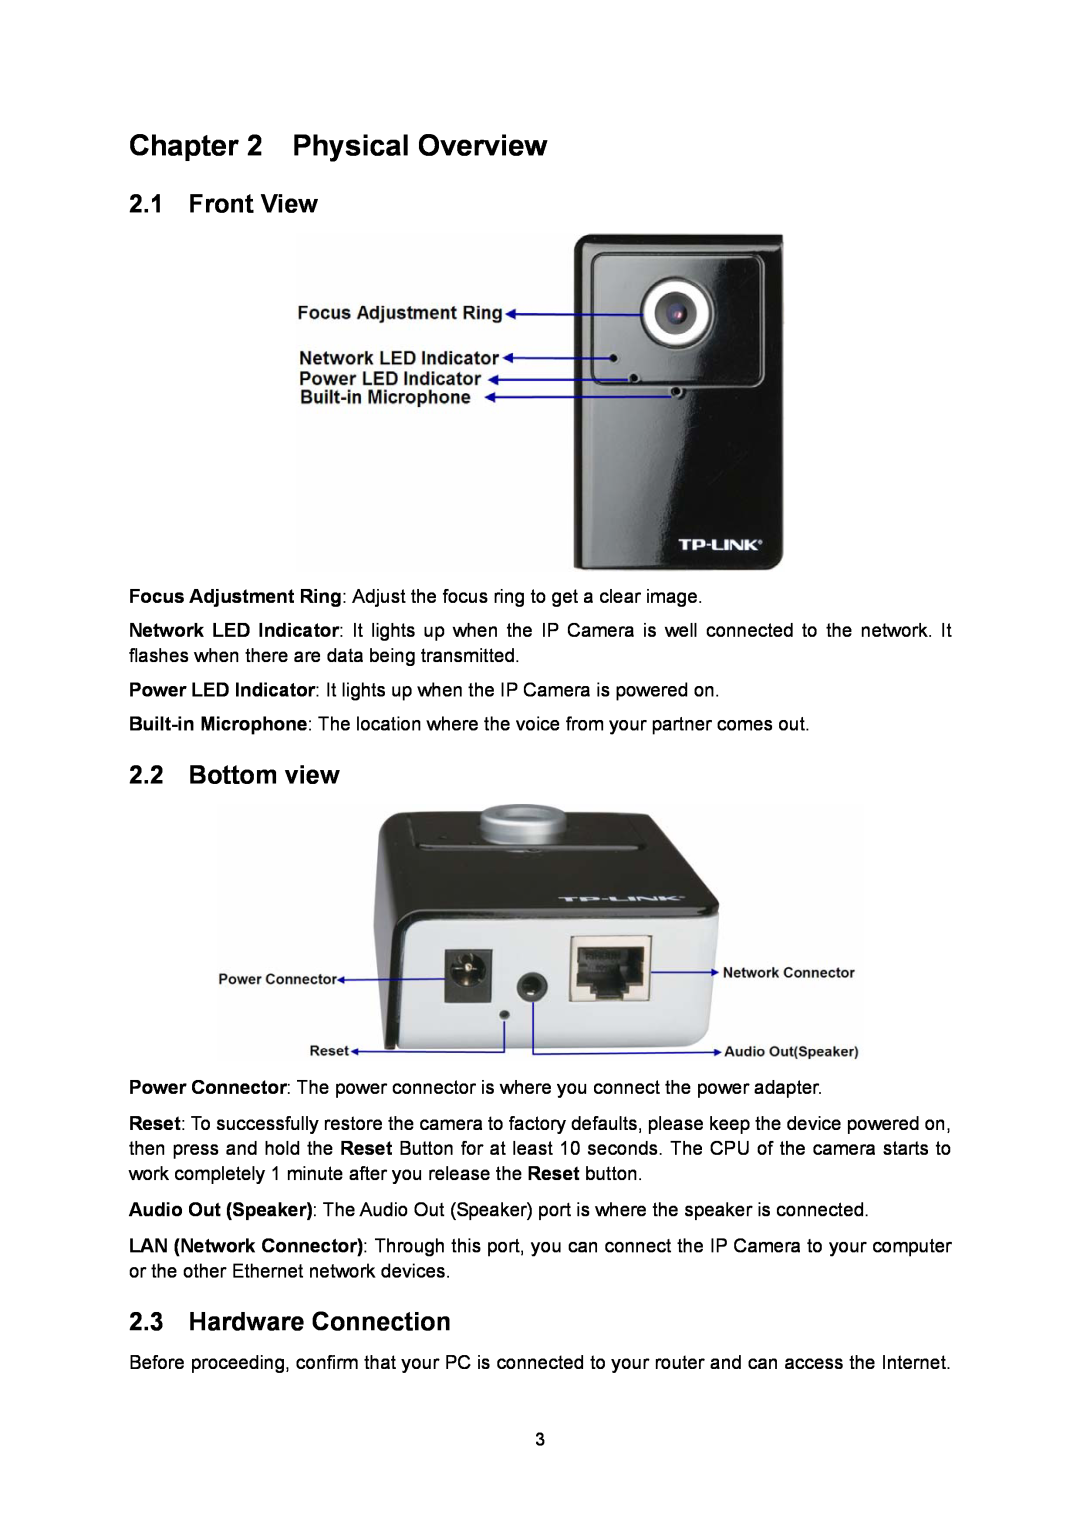 TP-Link TL-SC3130G manual Physical Overview, Front View, Bottom view, Hardware Connection 